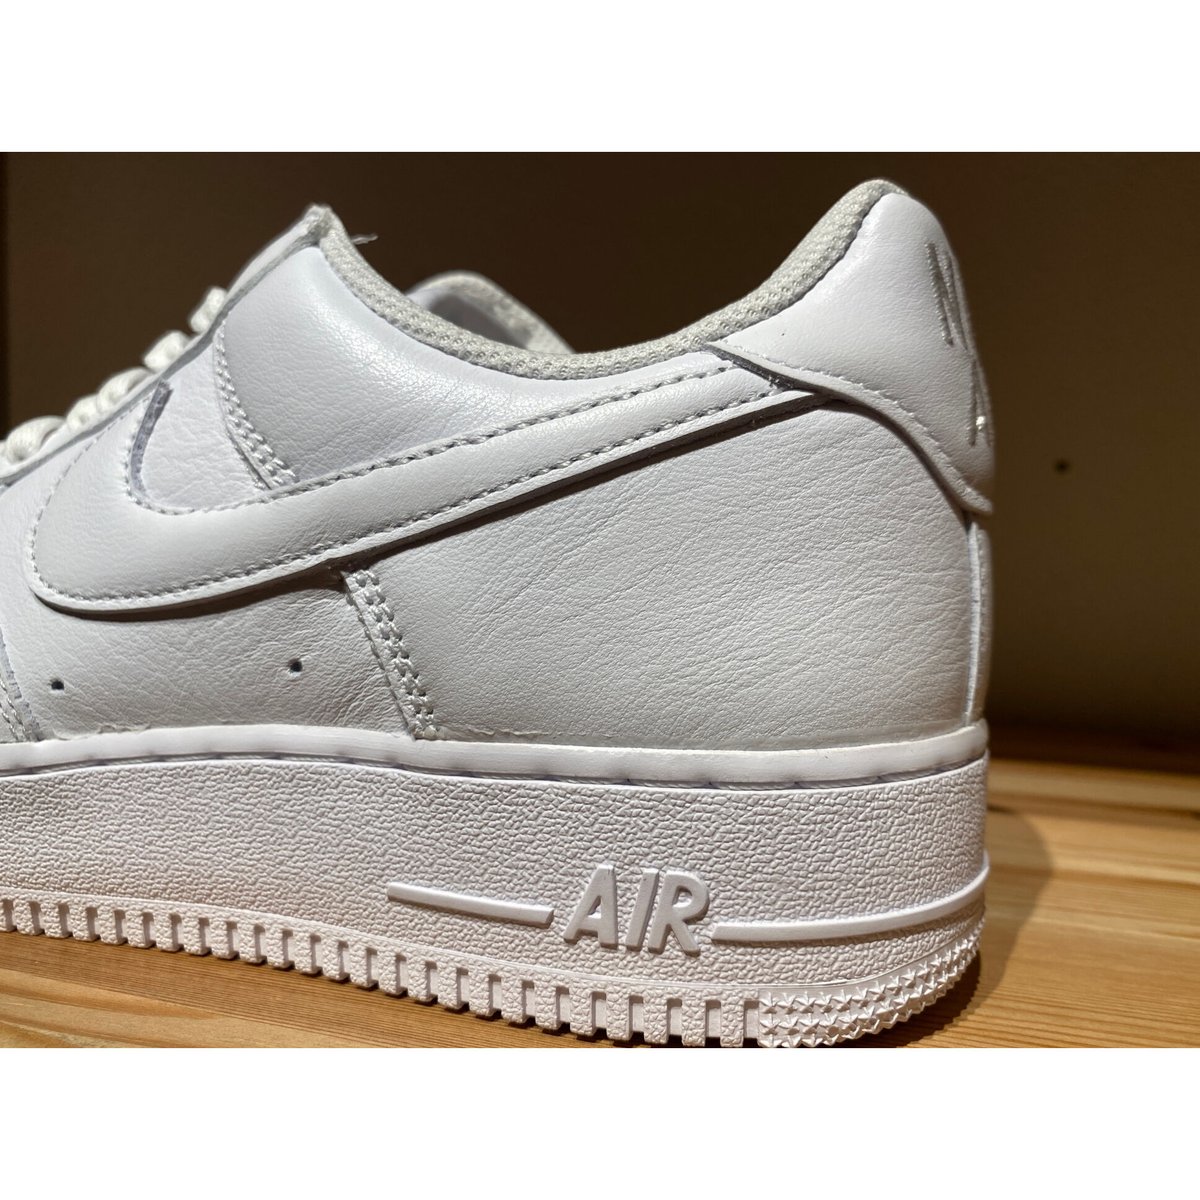 Nike Air Force 1 Low40th Anniversary29.0